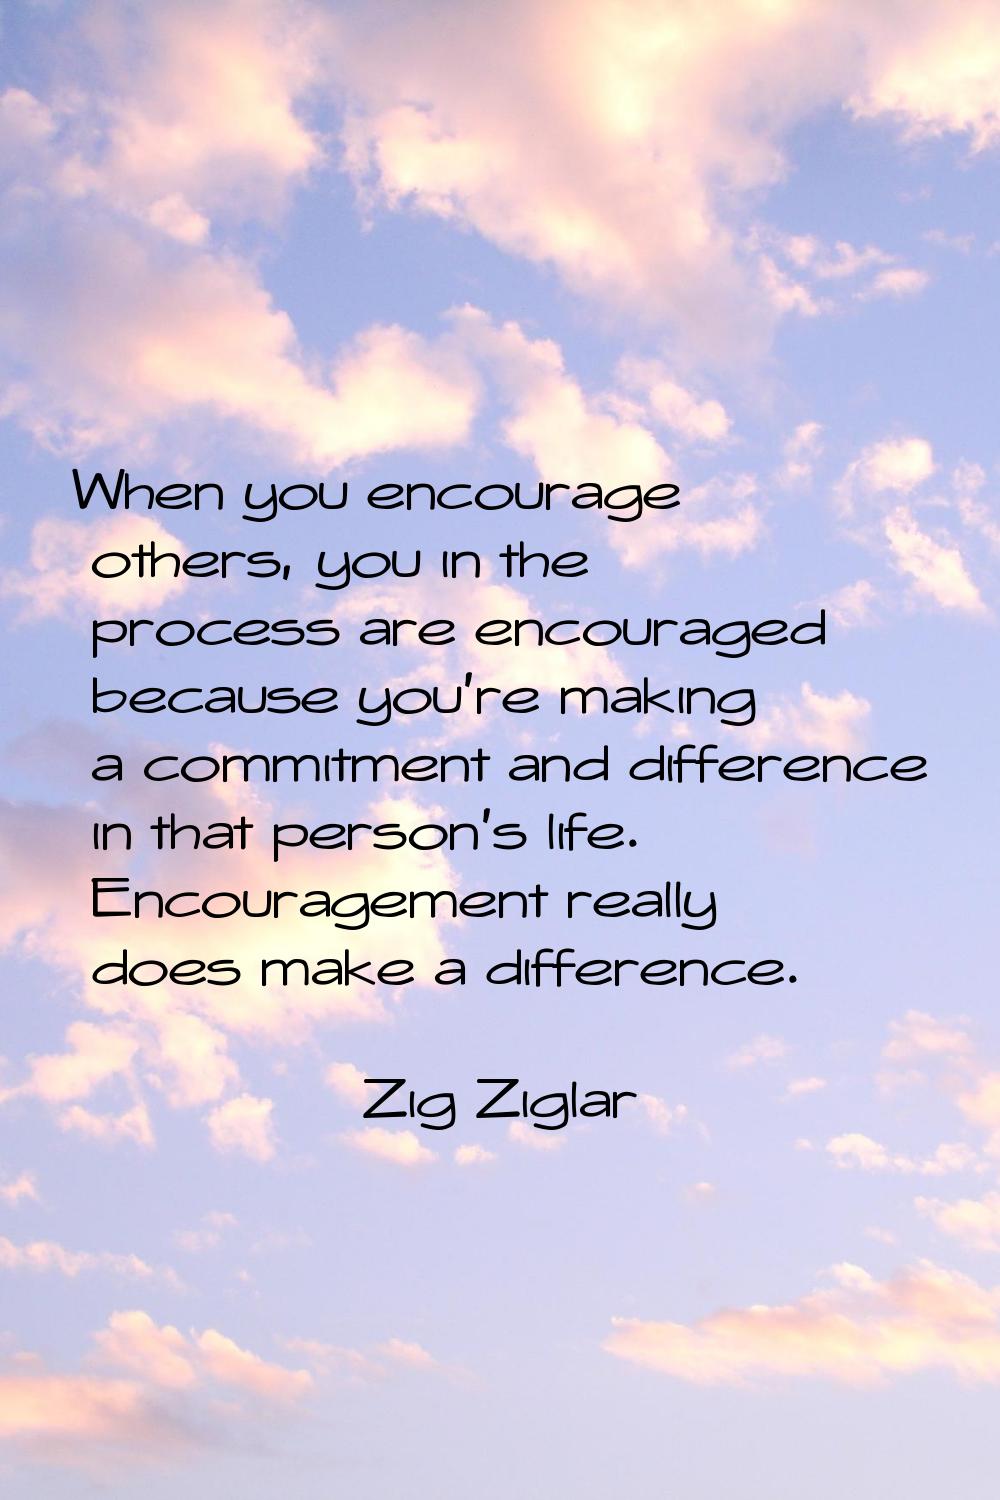 When you encourage others, you in the process are encouraged because you're making a commitment and